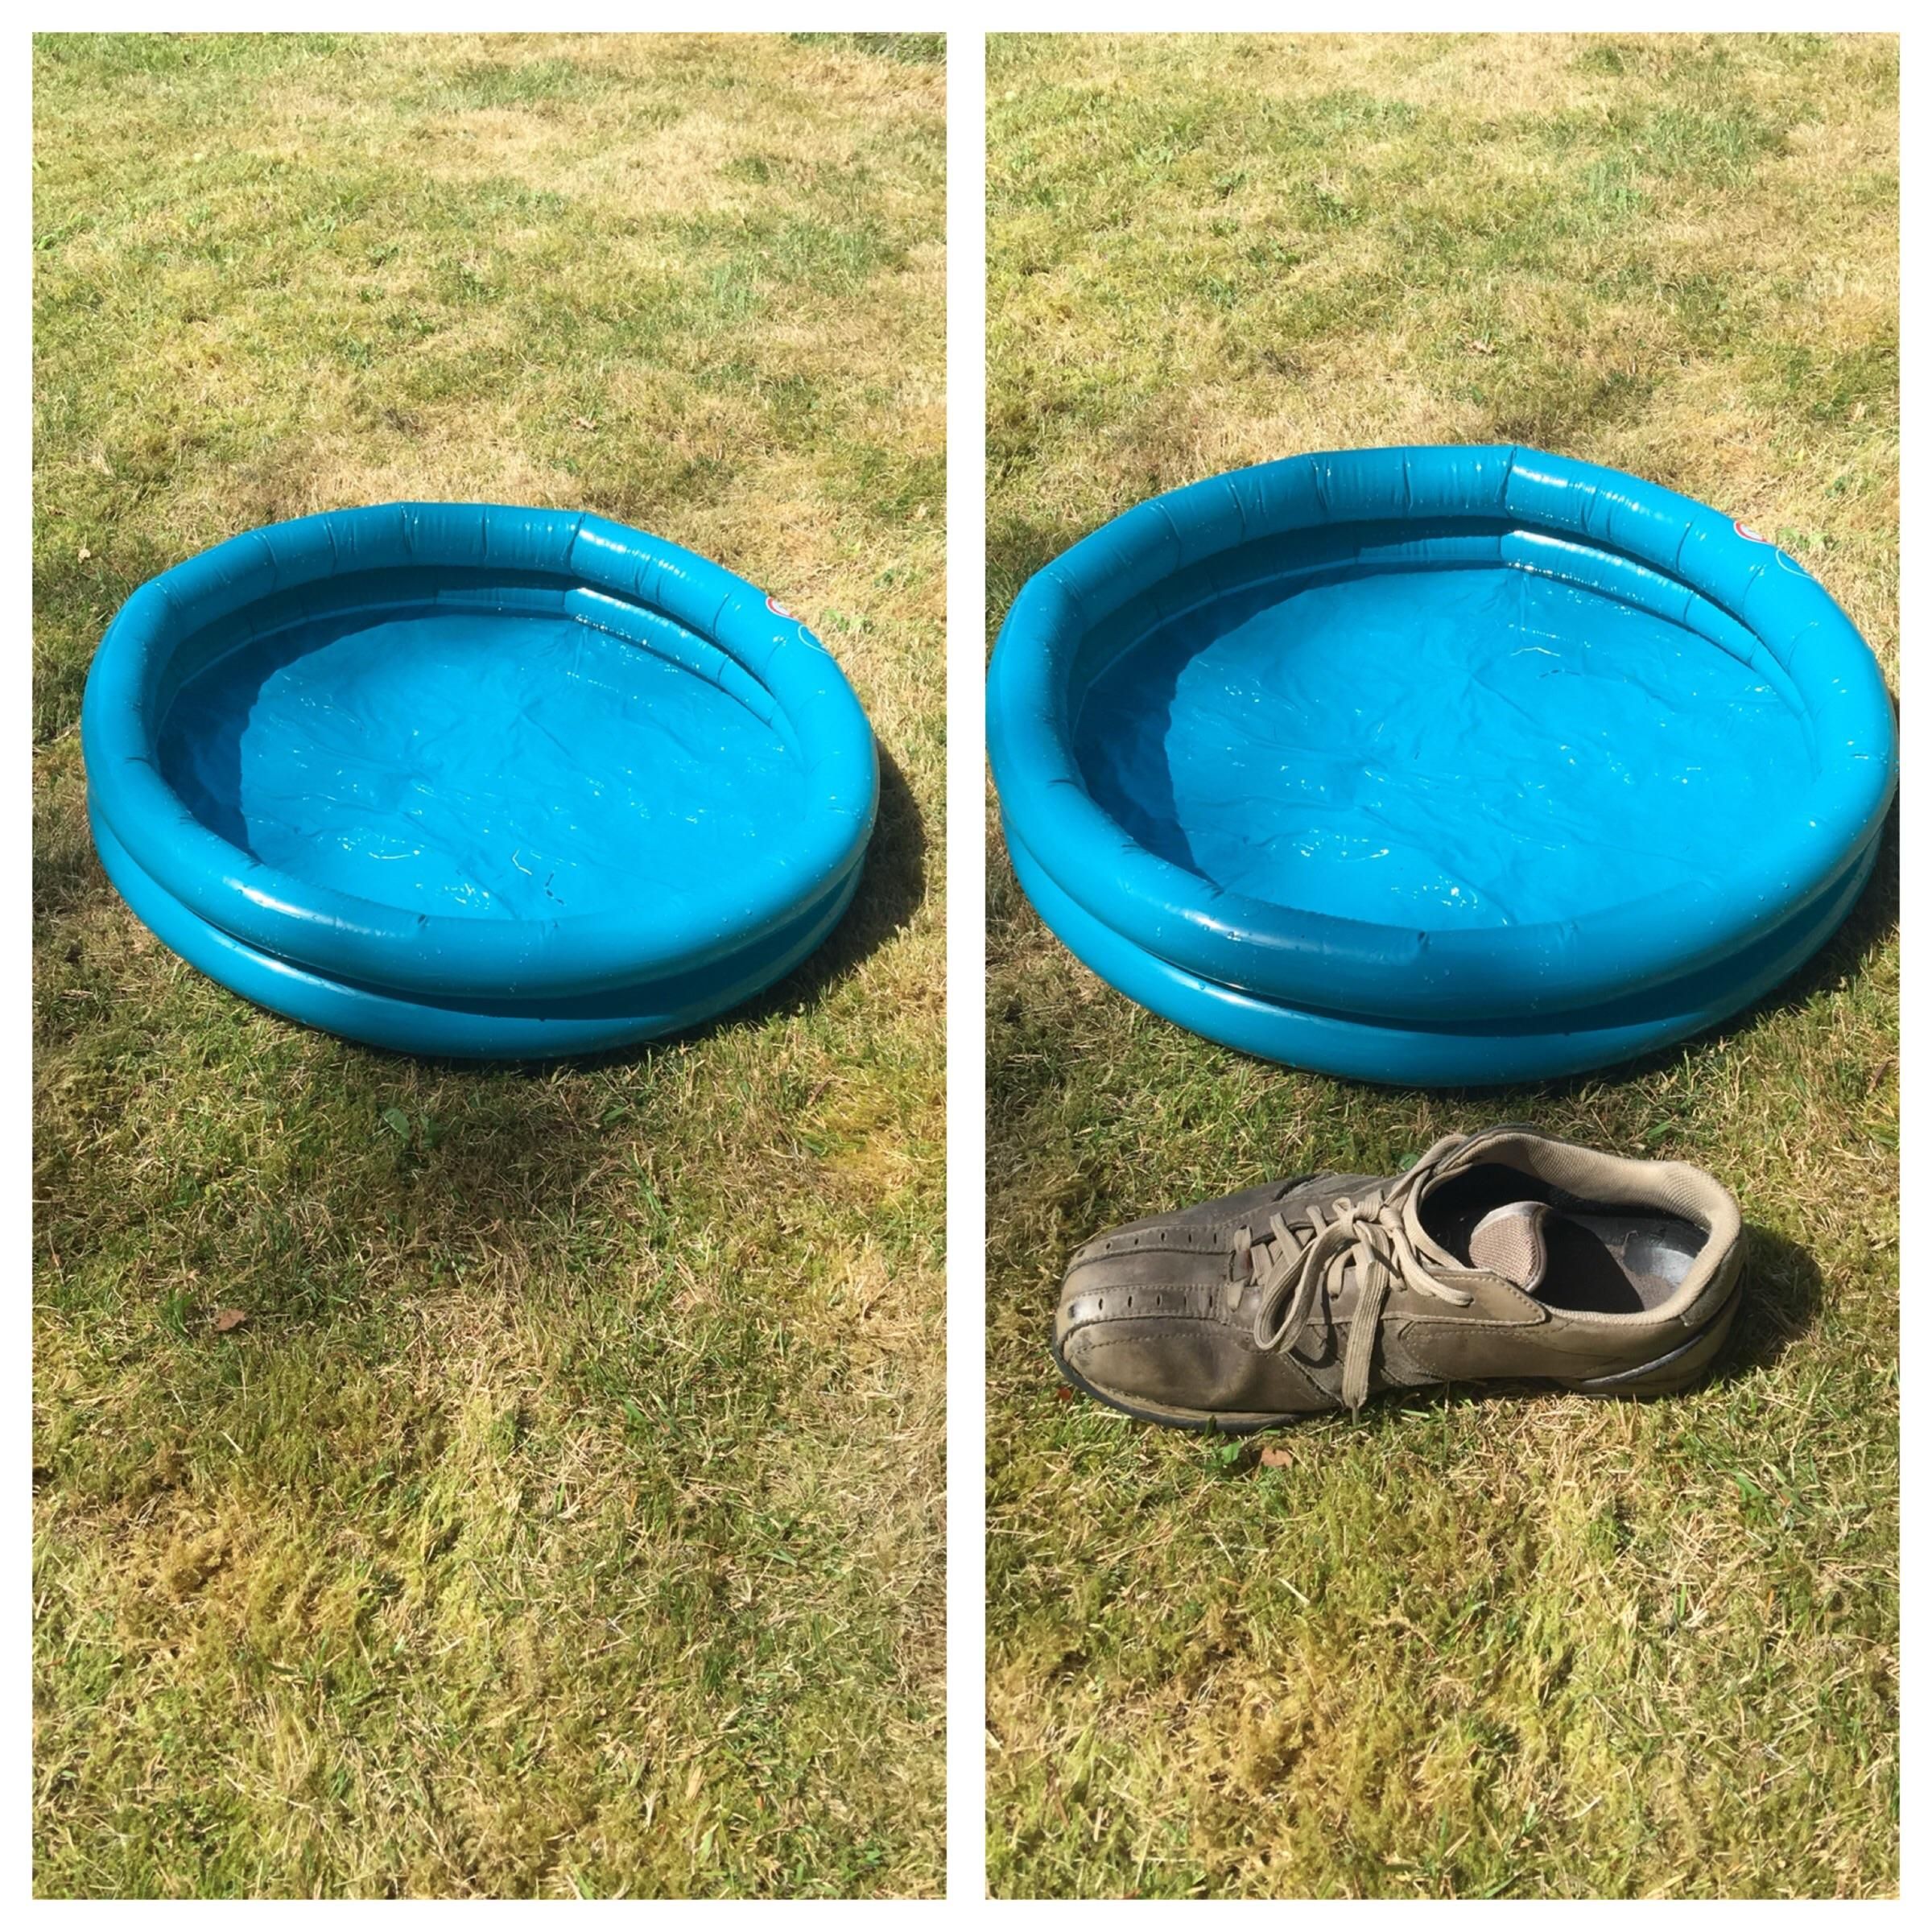 To be fair my wife did think this paddling pool was suspiciously cheap